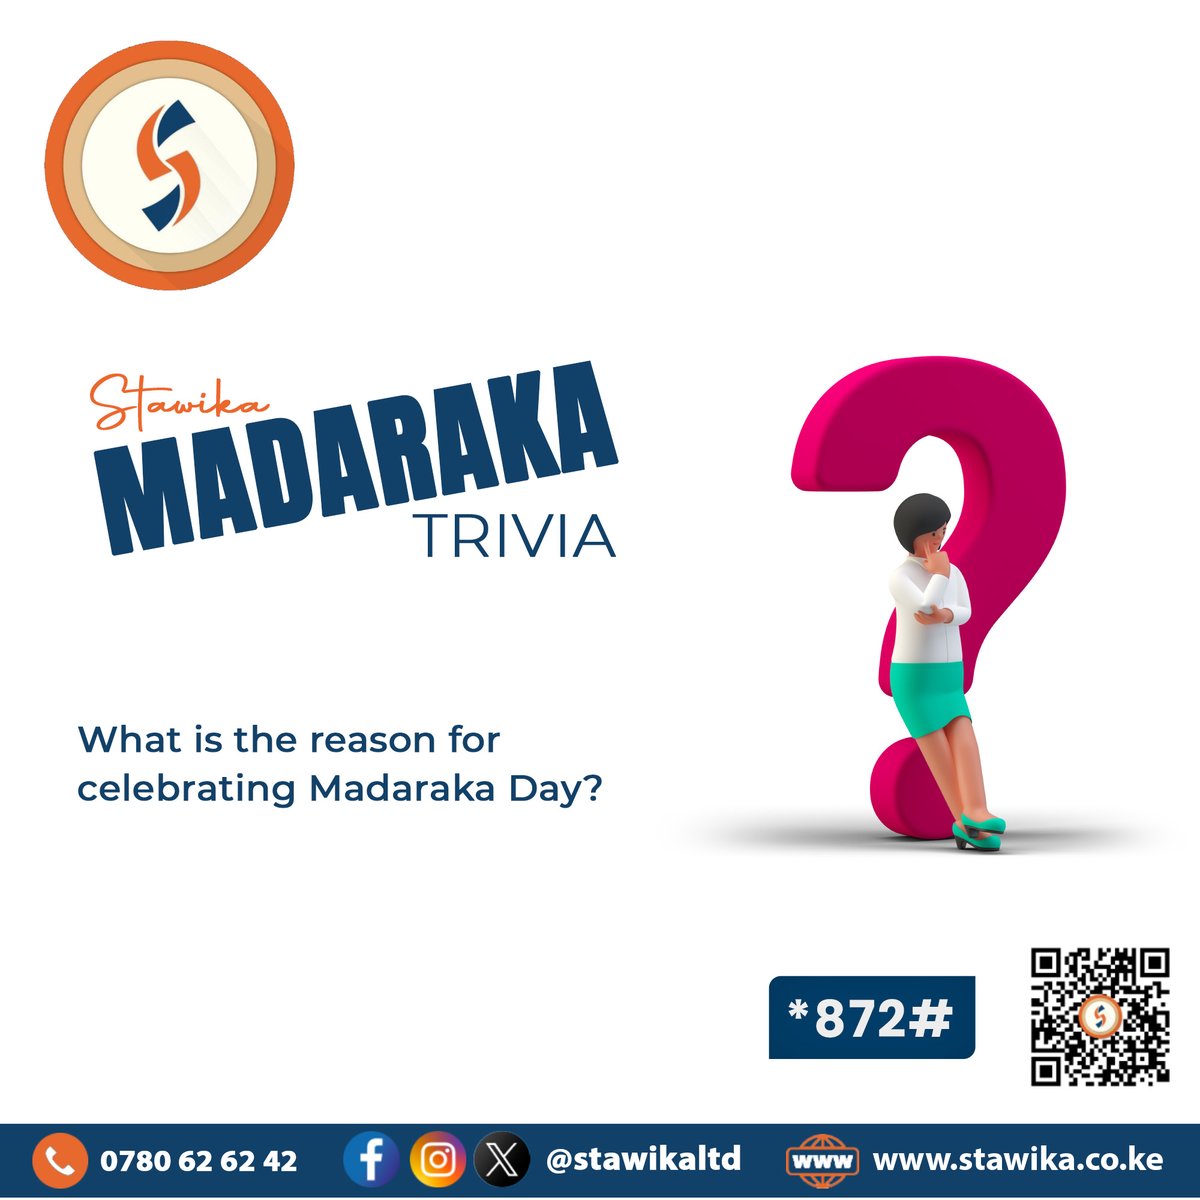 HOW WELL DO YOU KNOW YOUR COUNTRY?

Get a chance to win airtime, a shopping voucher and merchandise by tackling our Madaraka Trivia.

#Stawika
#Nimestawika
#MadarakaDay